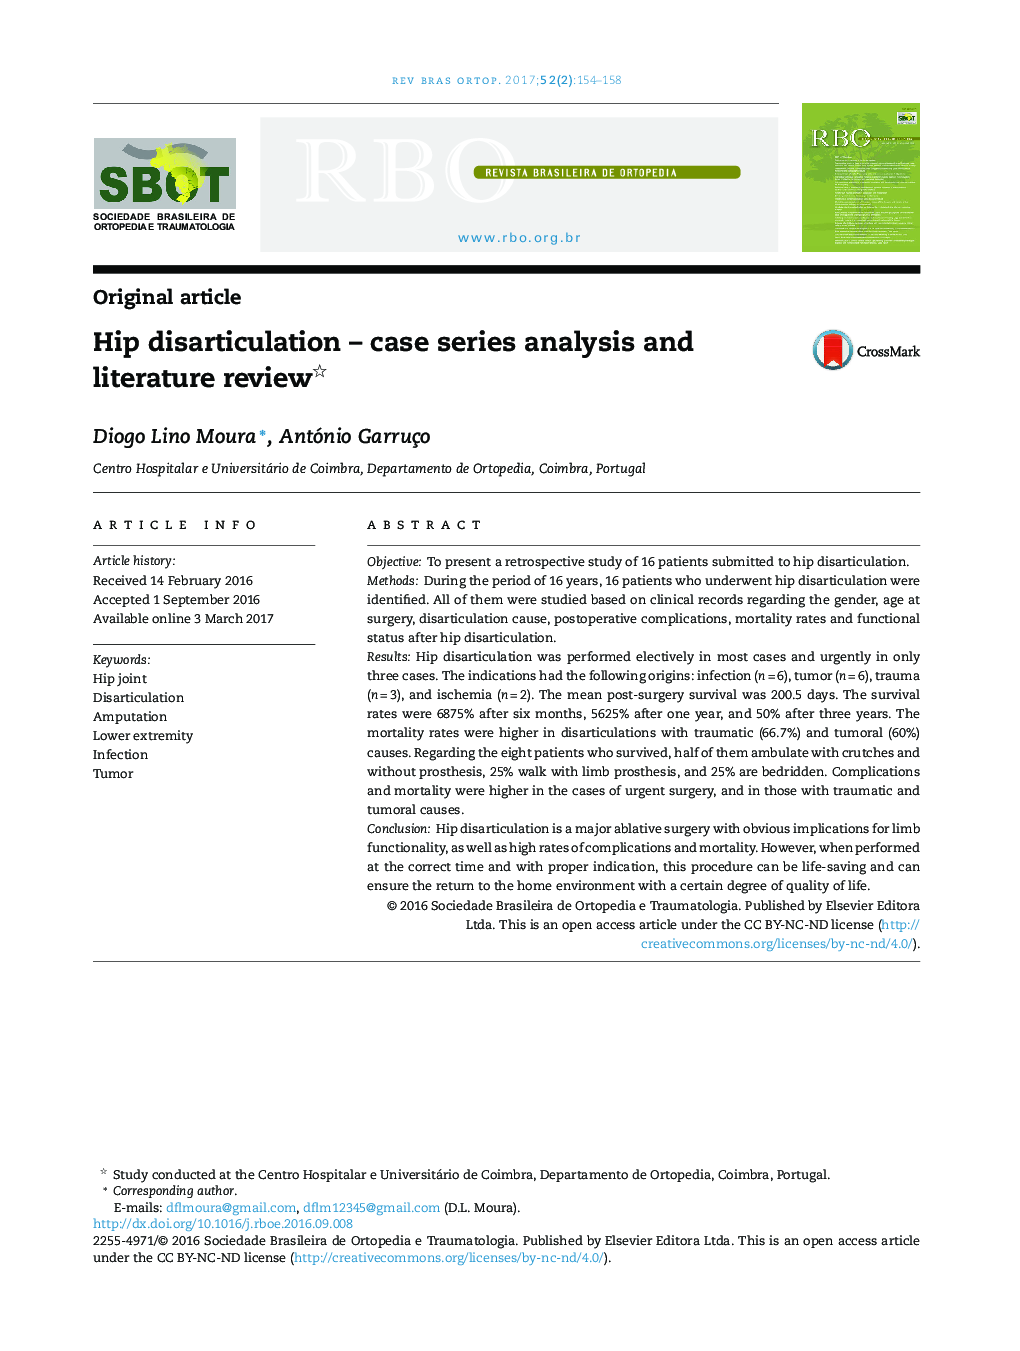 Hip disarticulation - case series analysis and literature review